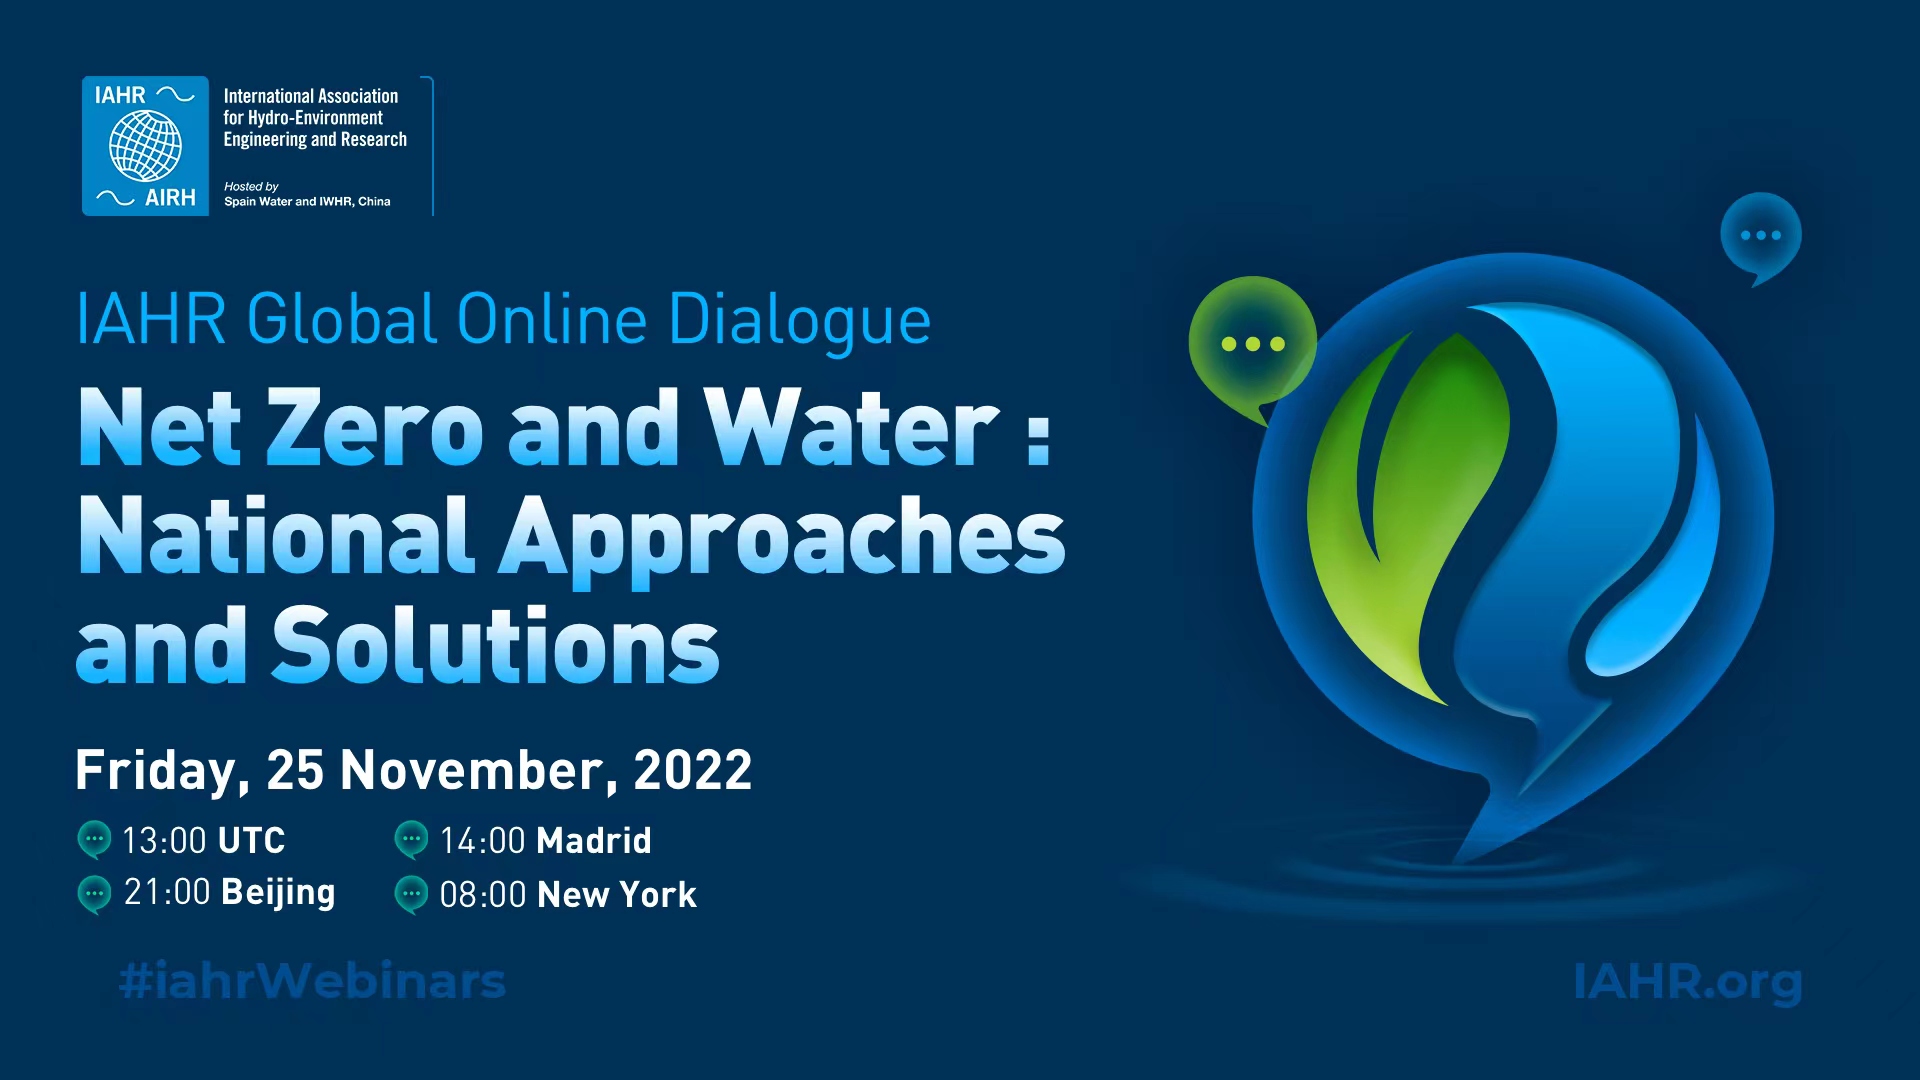 IAHR Global Online Dialogue on Net Zero and Water: National Approaches and Solutions 